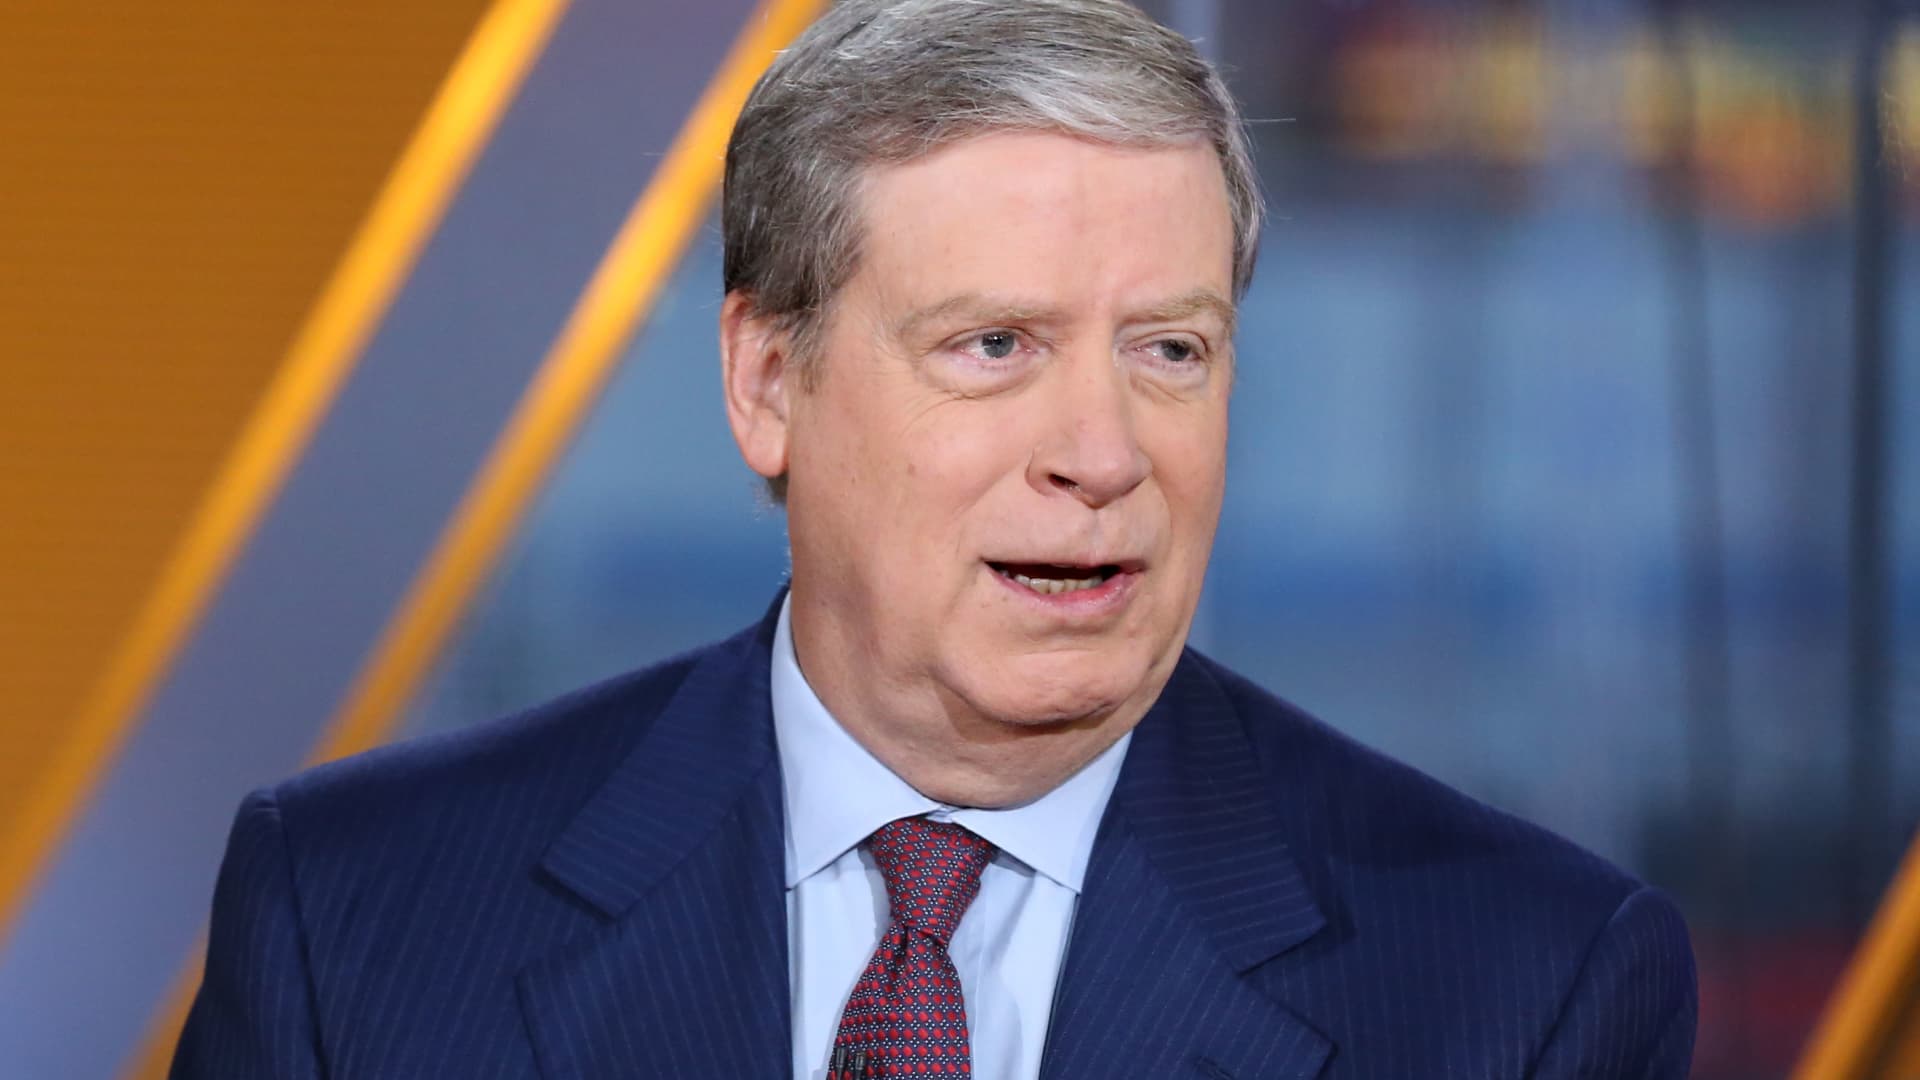 Stanley Druckenmiller piles into these AI plays and other technology stocks